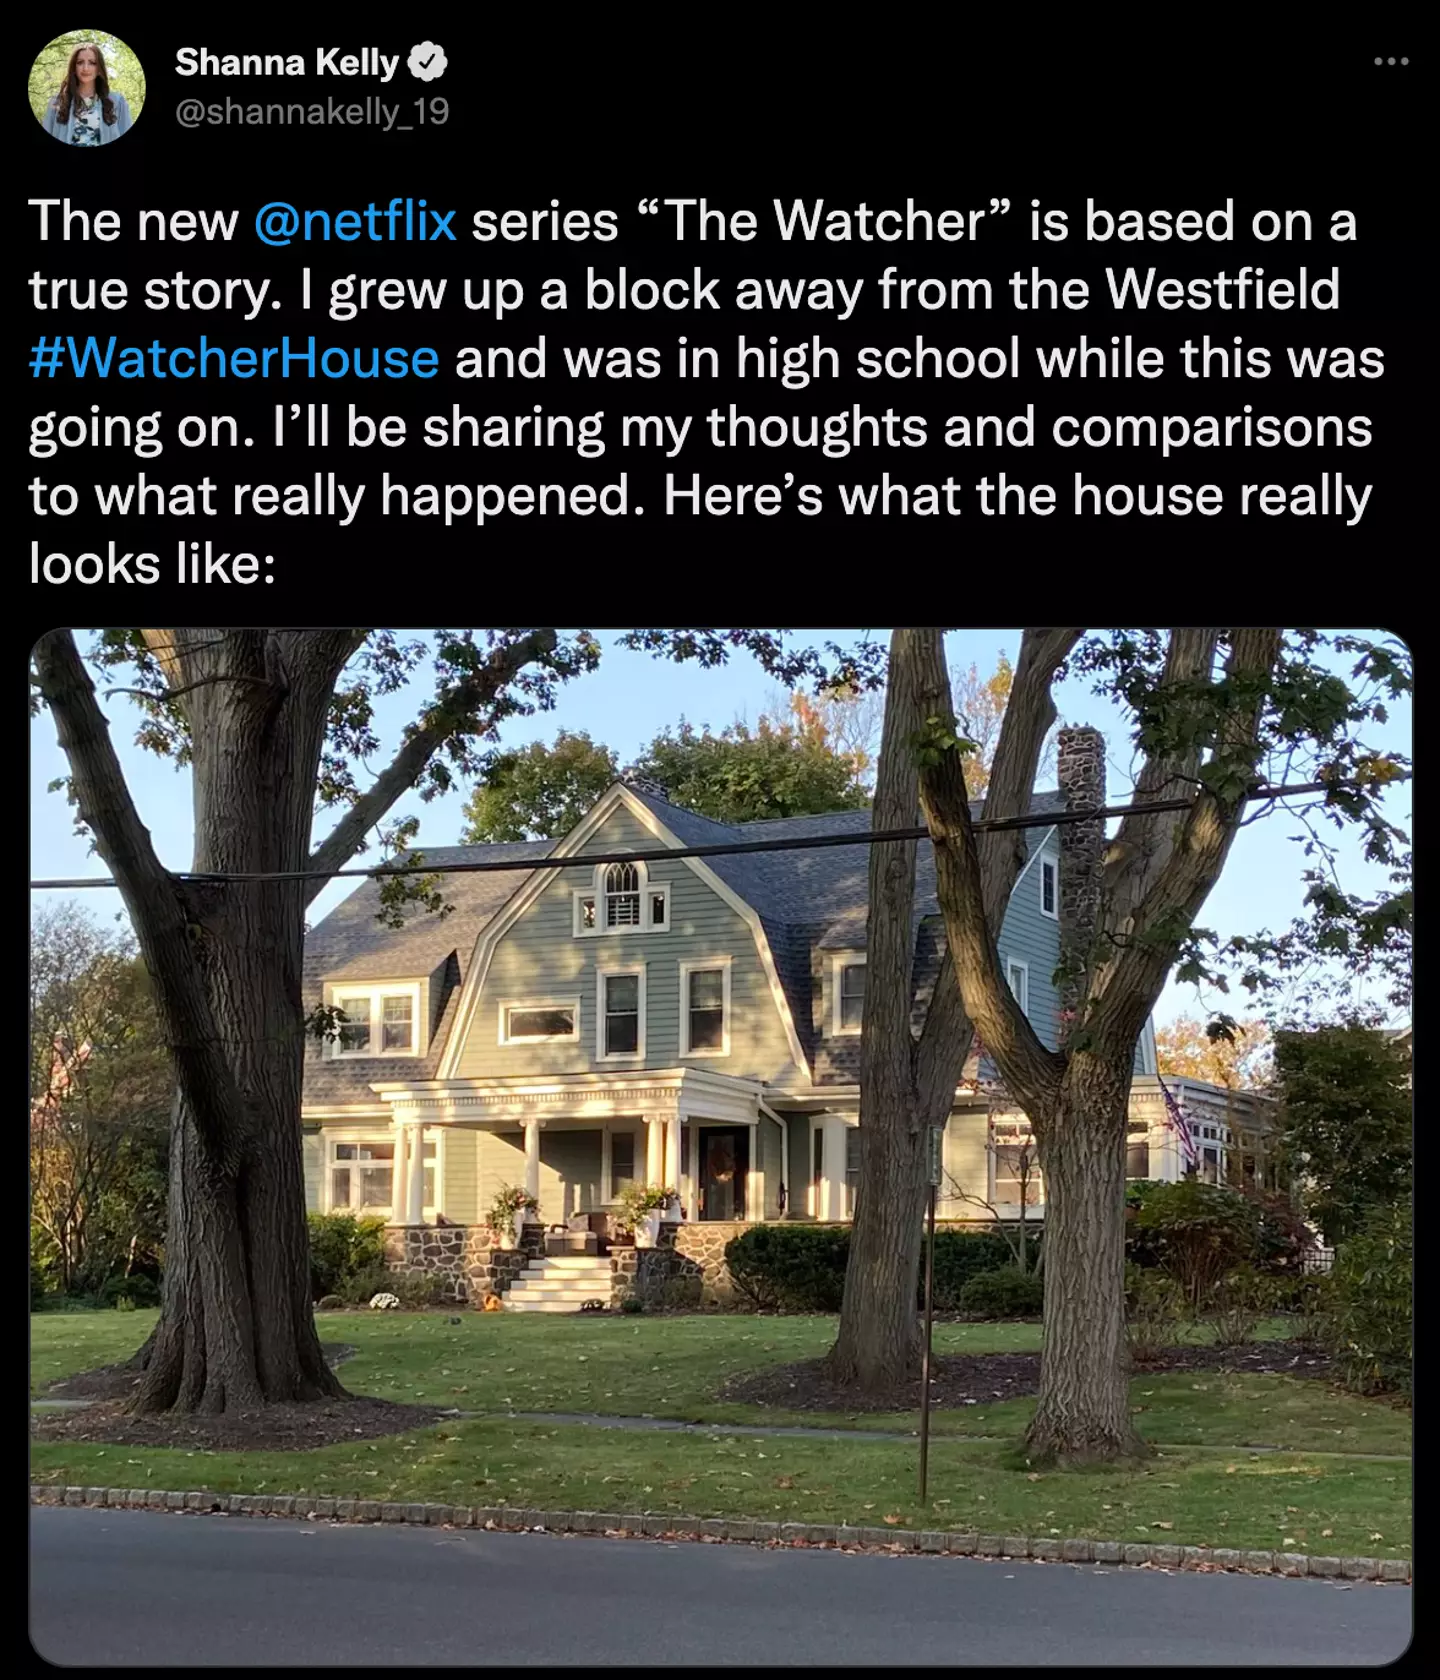 Shanna Kelly has shared an image of what the Watcher house looks like in real life.